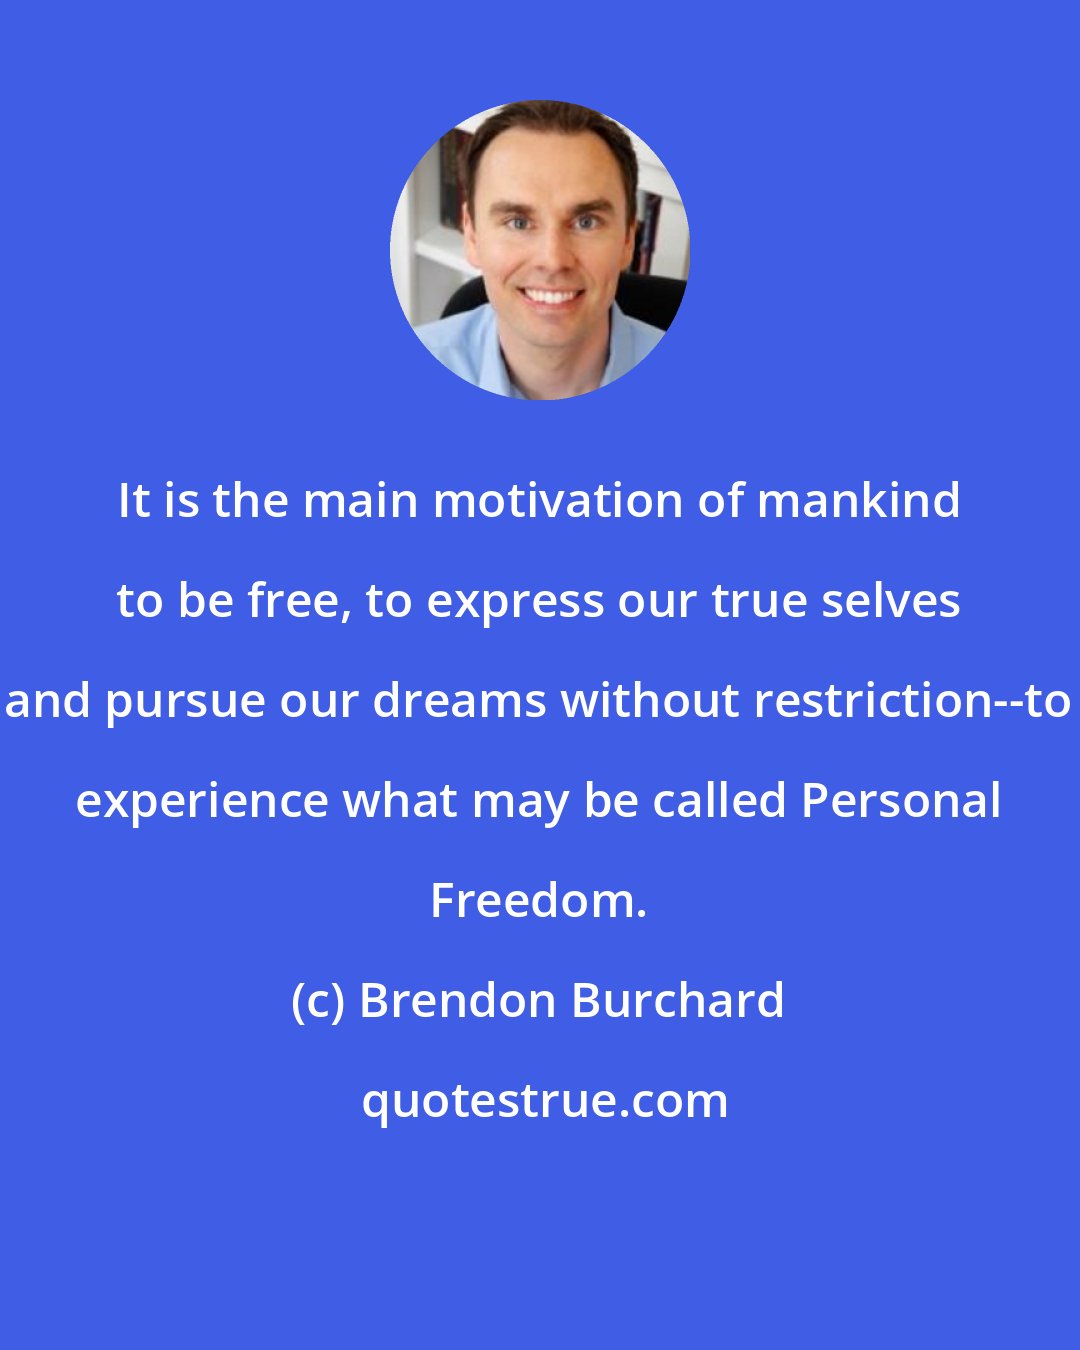 Brendon Burchard: It is the main motivation of mankind to be free, to express our true selves and pursue our dreams without restriction--to experience what may be called Personal Freedom.